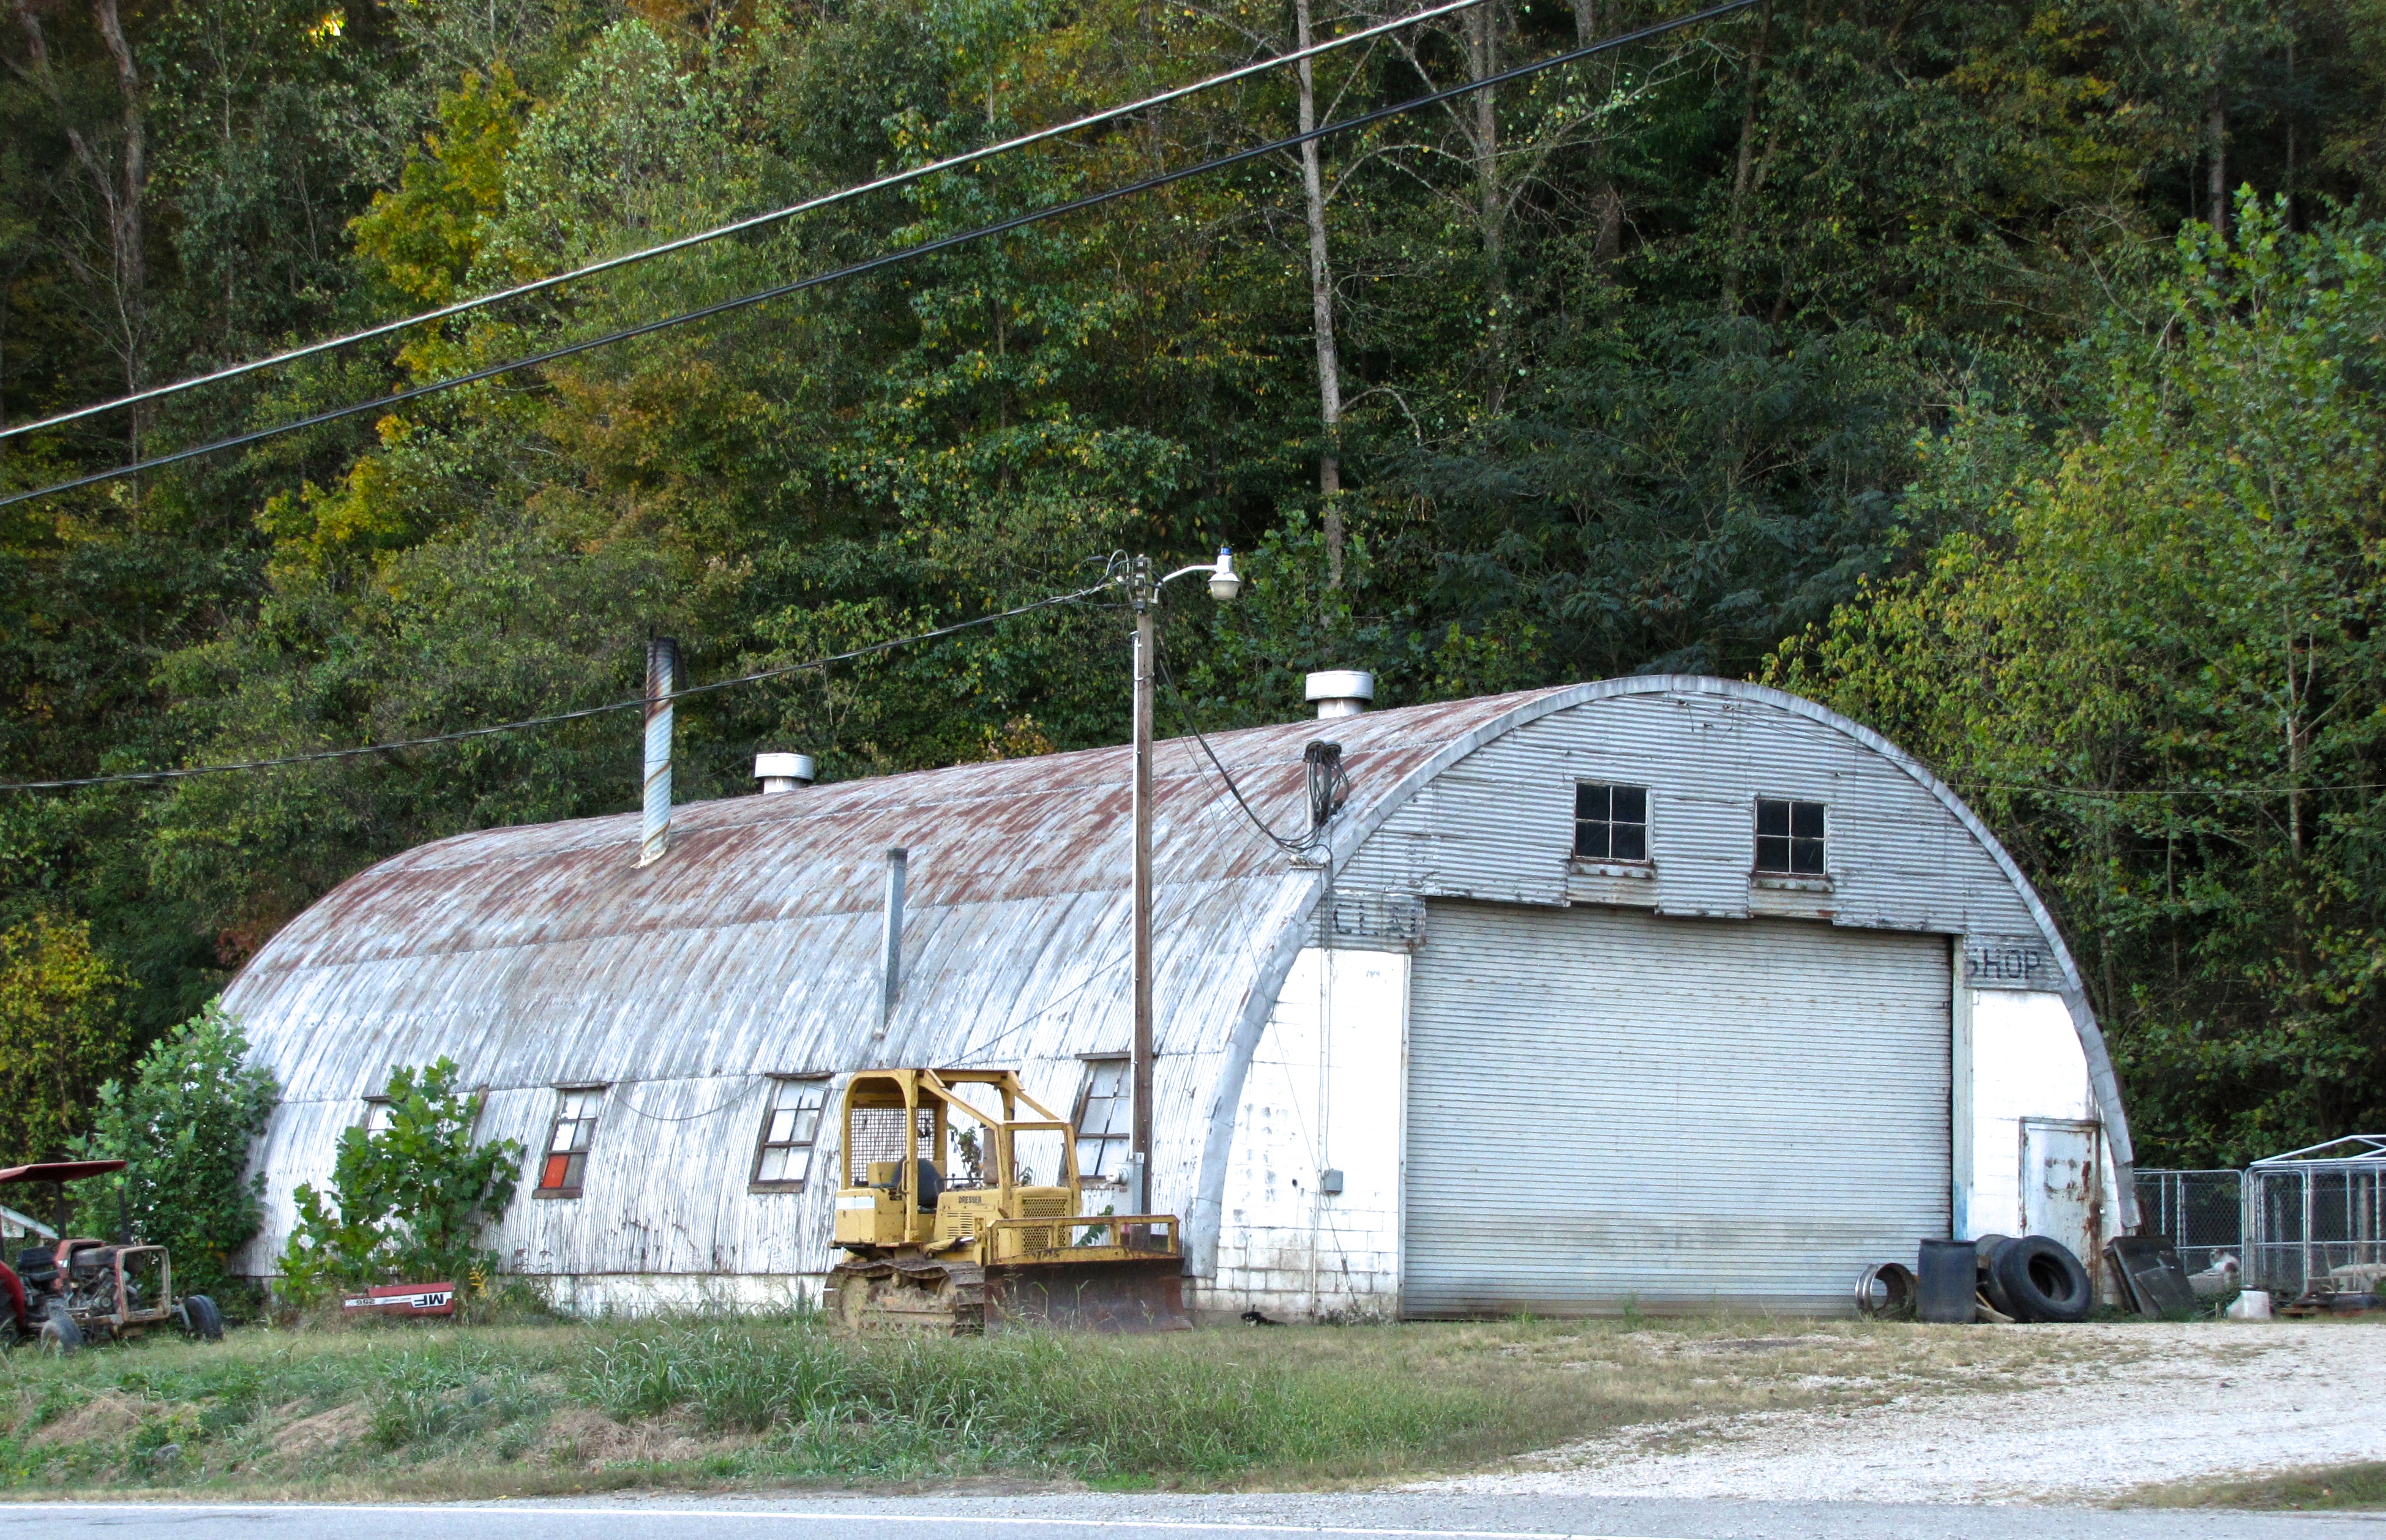 quonset hut in Terms Of Service, TN